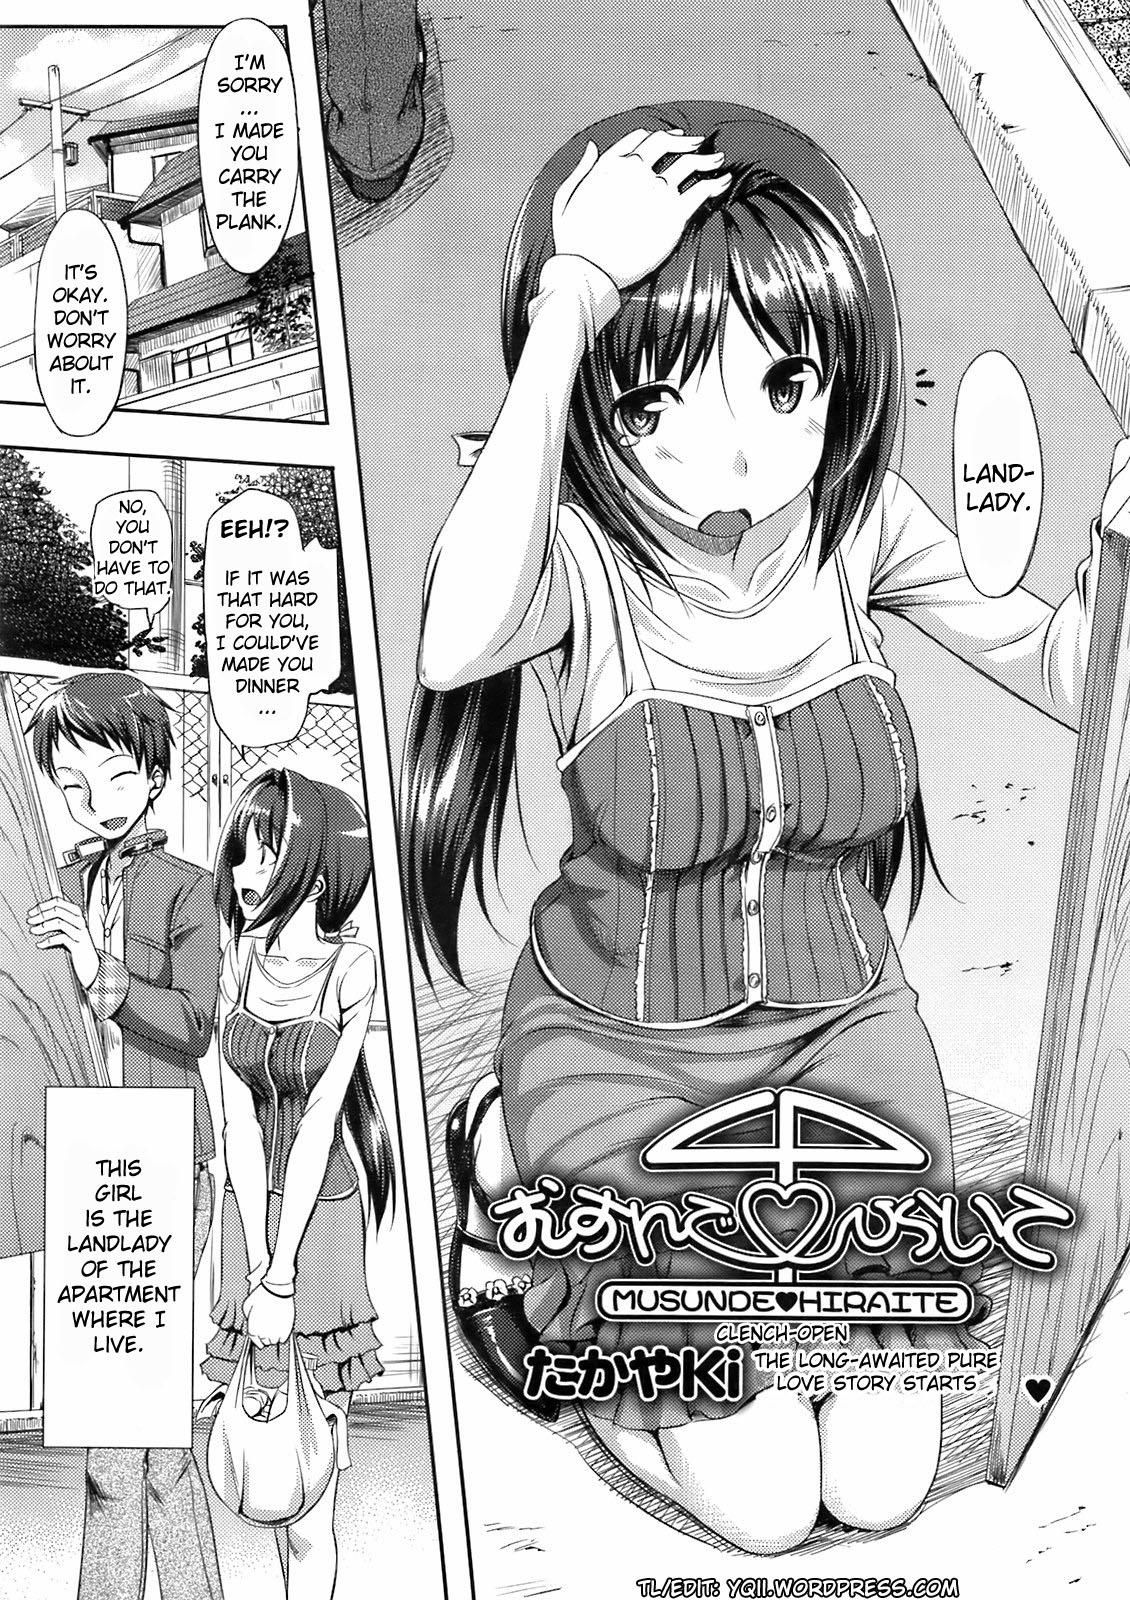 Best Blowjobs Ever Musunde Hiraite Ch. 1-4 Matures - Page 2